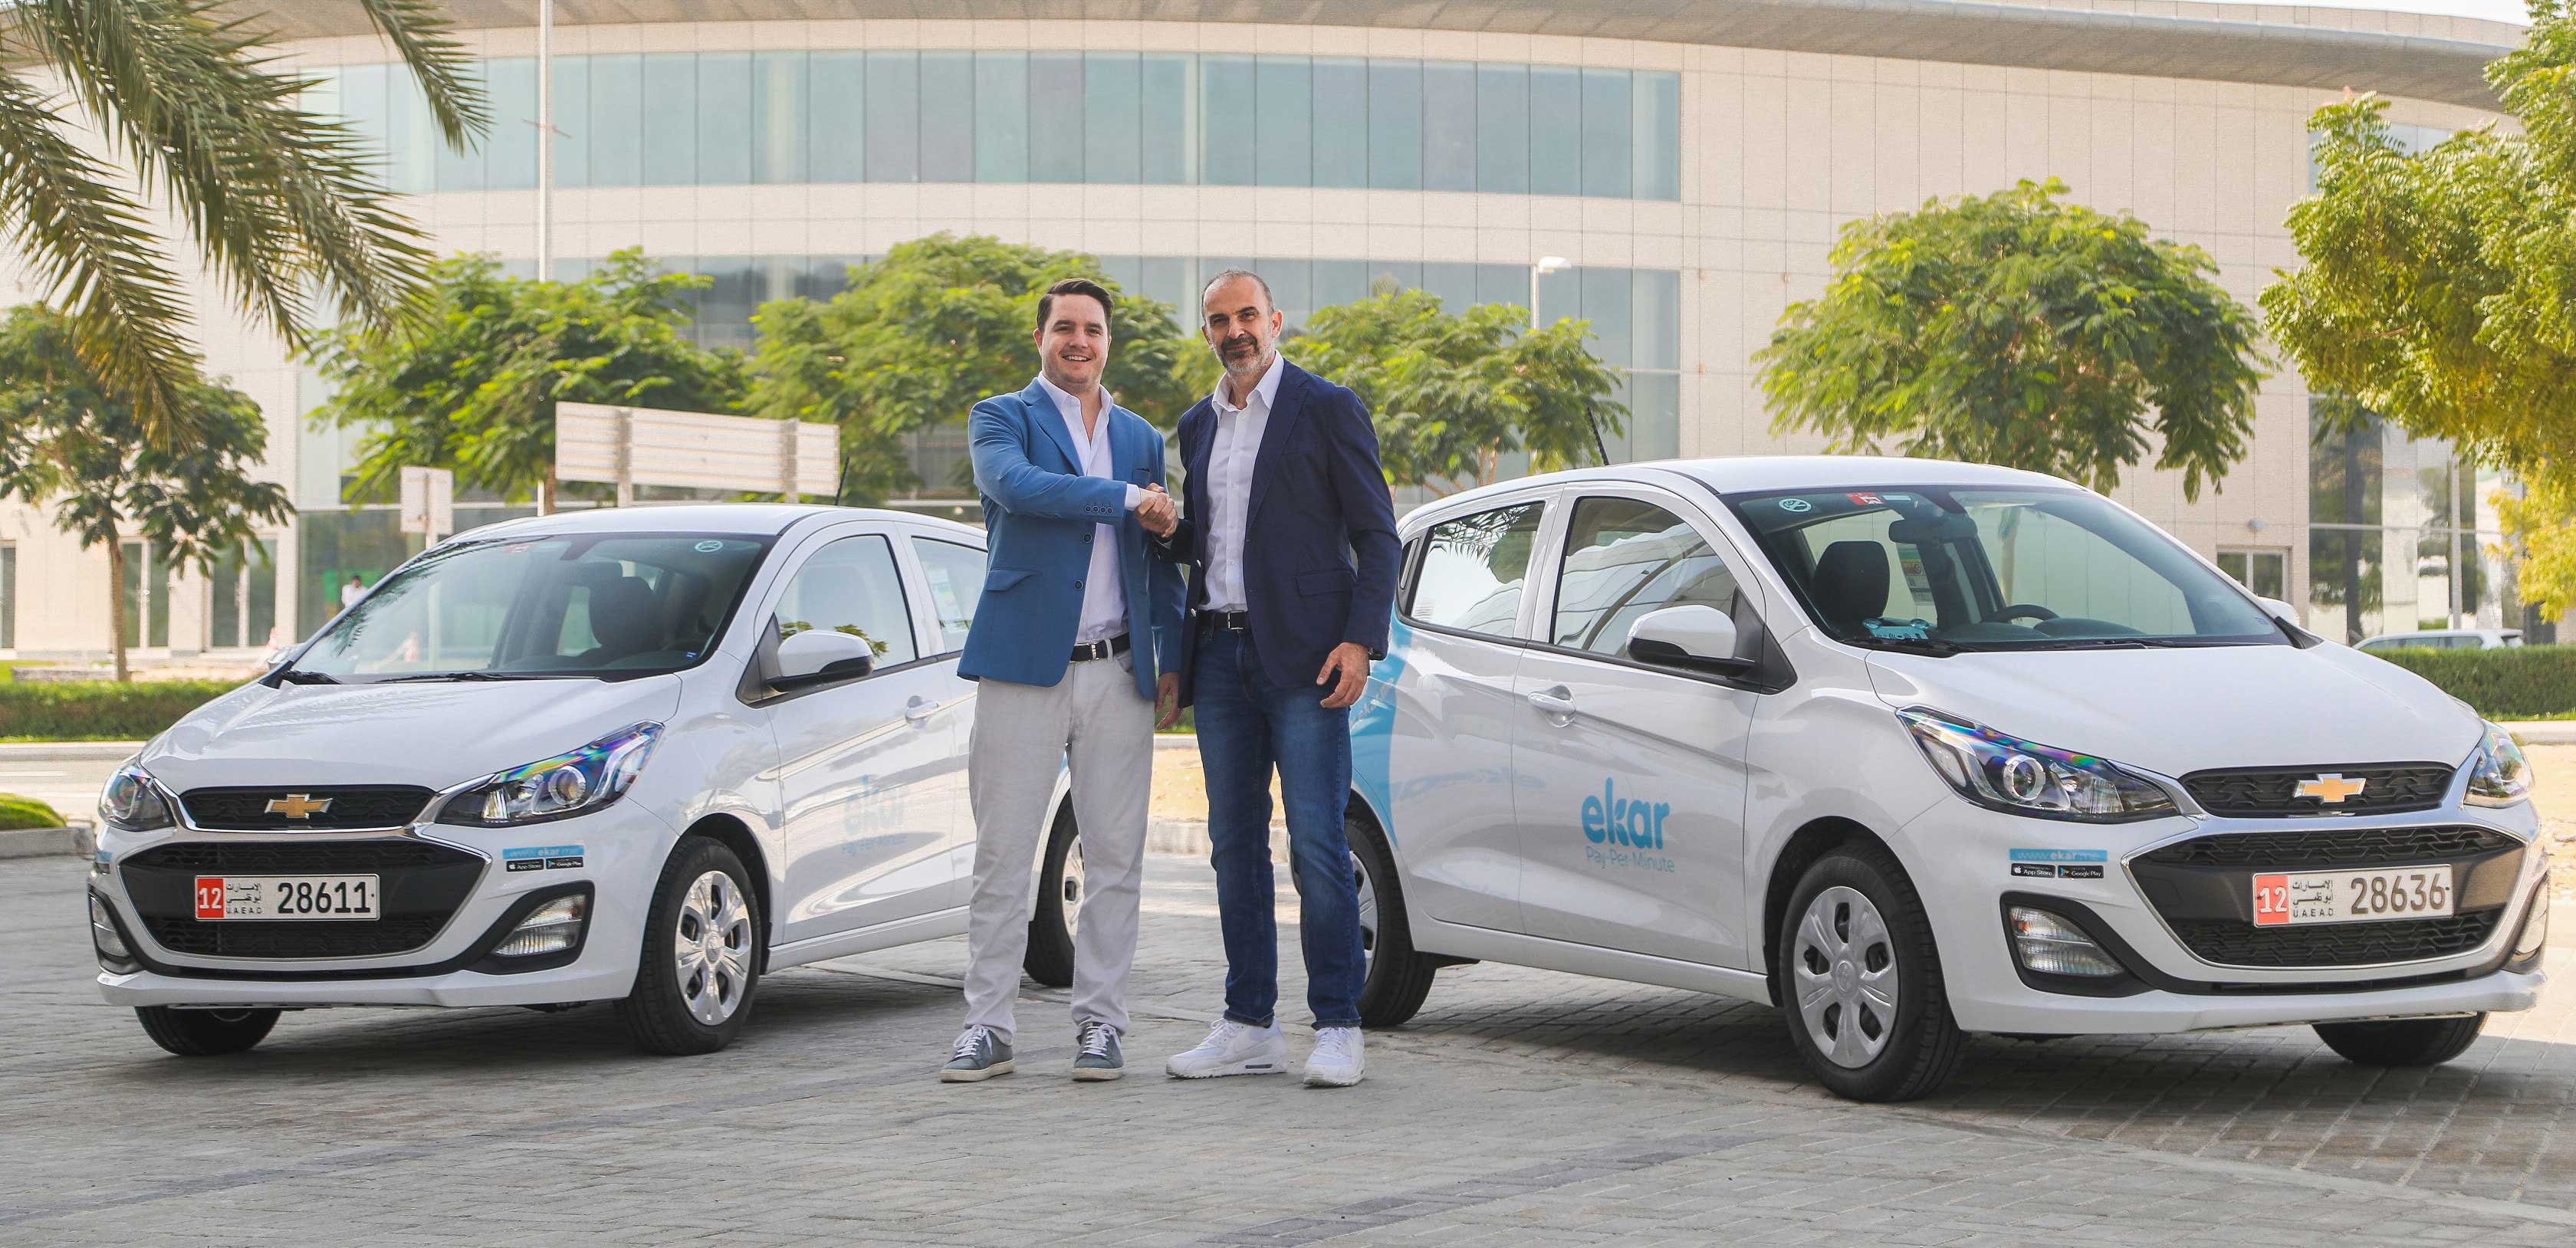 Chevrolet and ekar Facilitate Mobility in the UAE